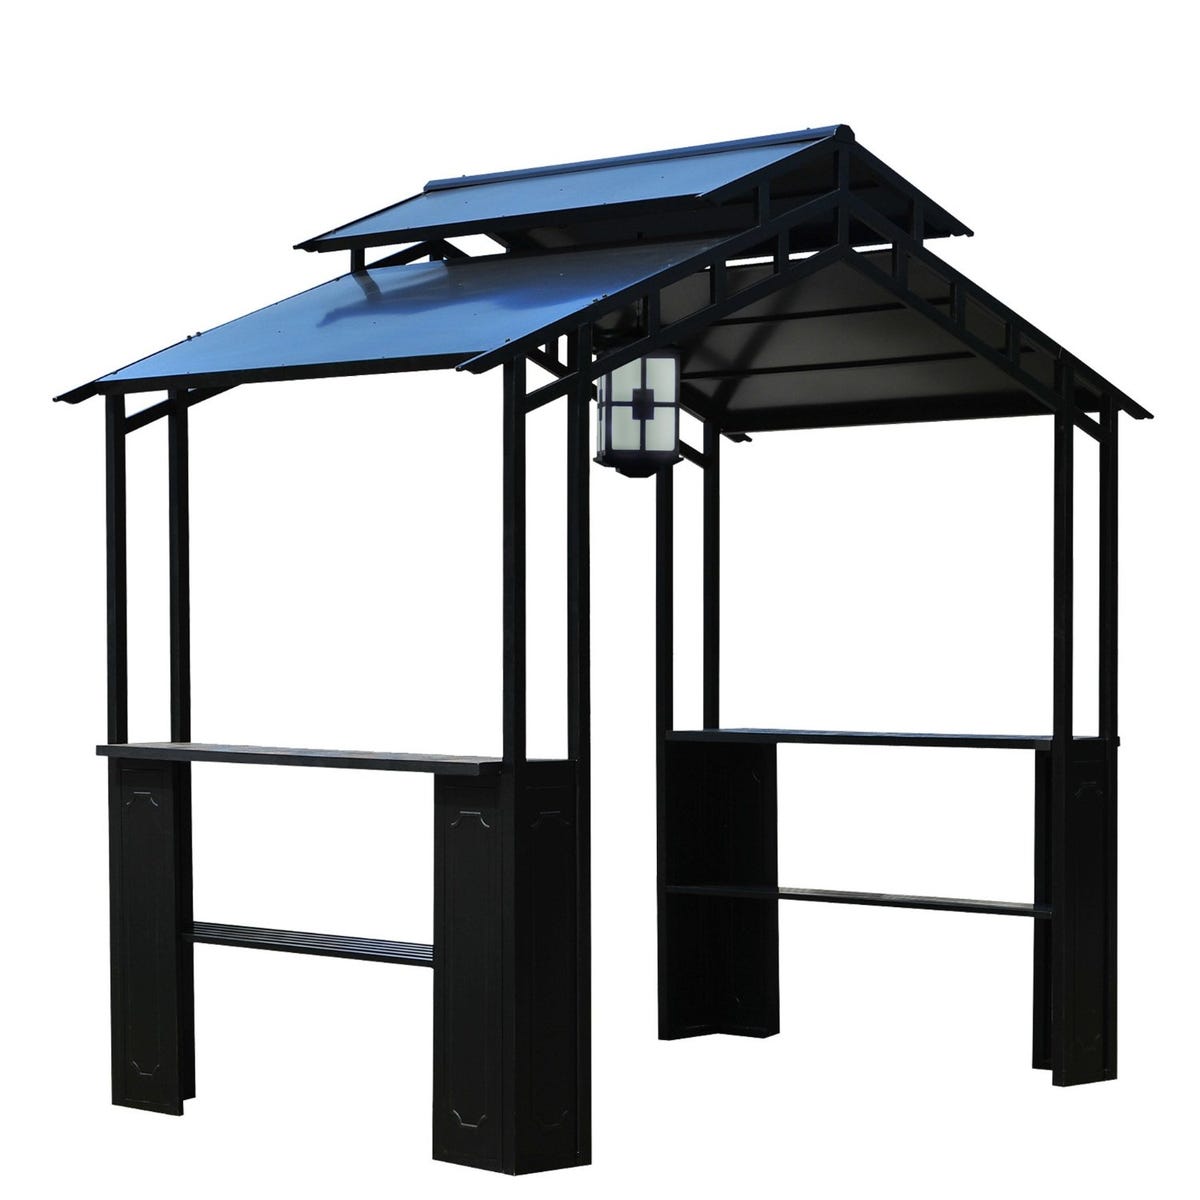 Grill in the shade or in the night with the Sunjoy Grill Gazebo with LED Lights.